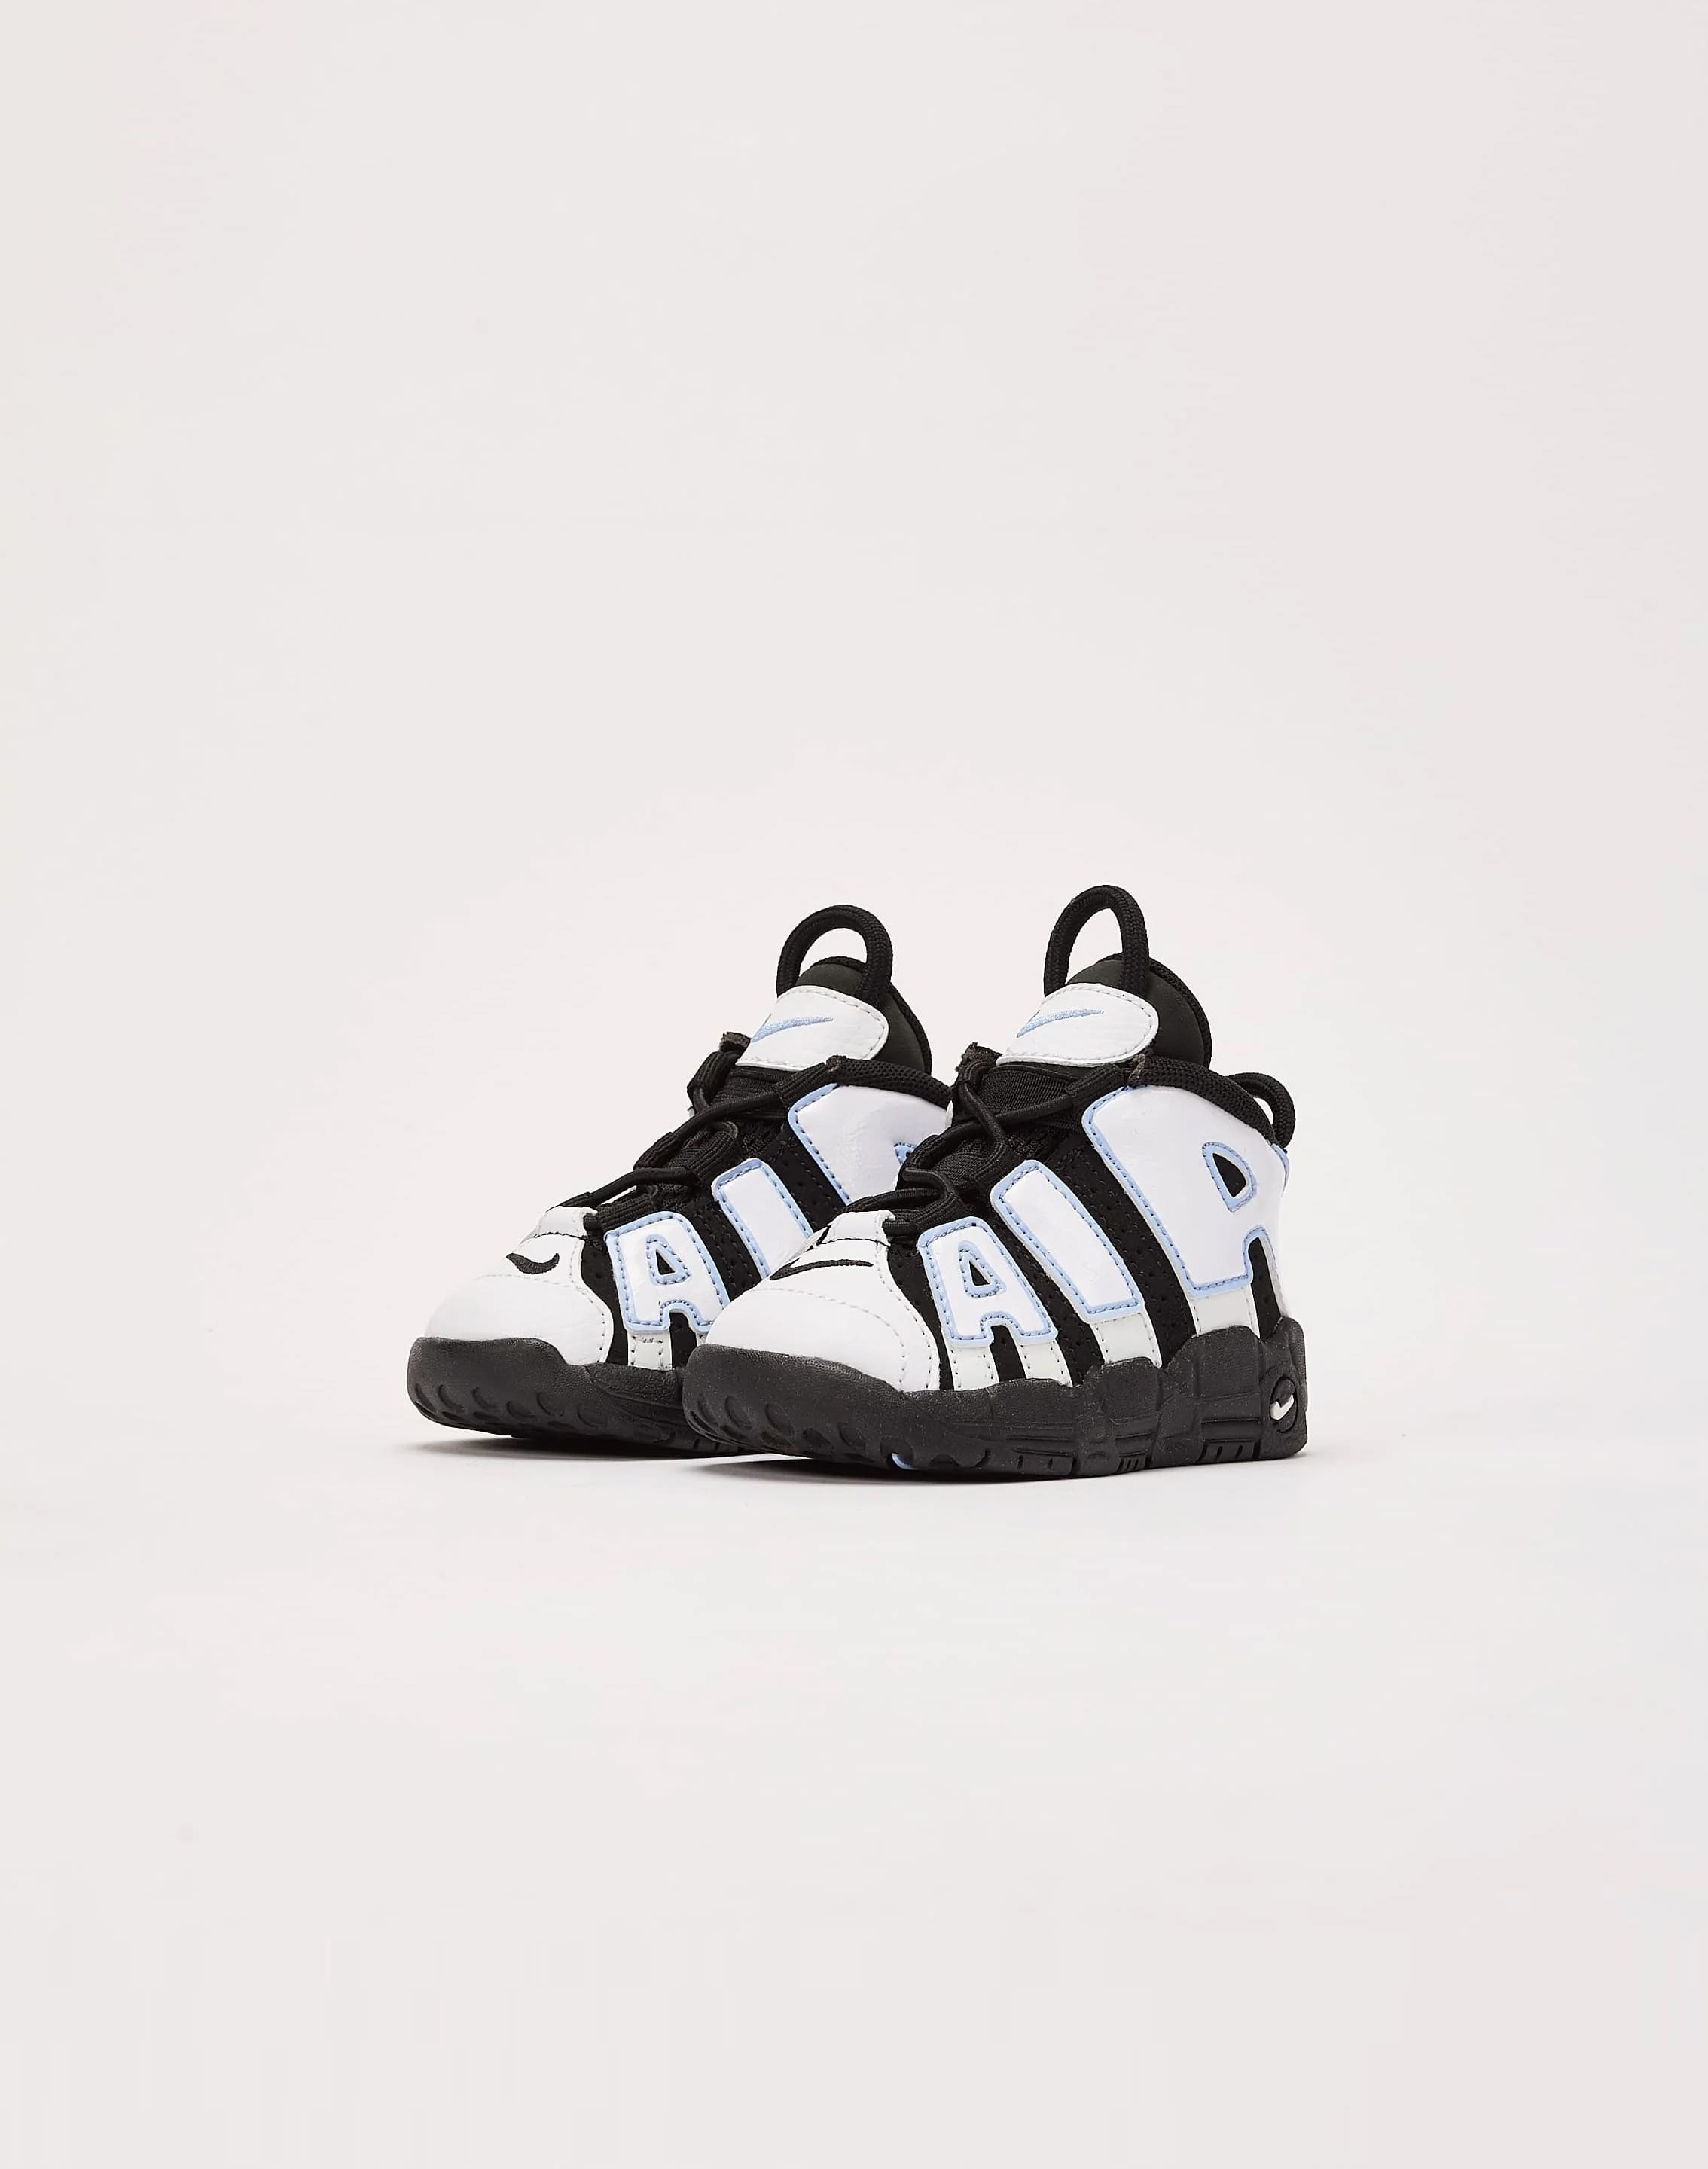 Nike Air More Uptempo '96 – DTLR